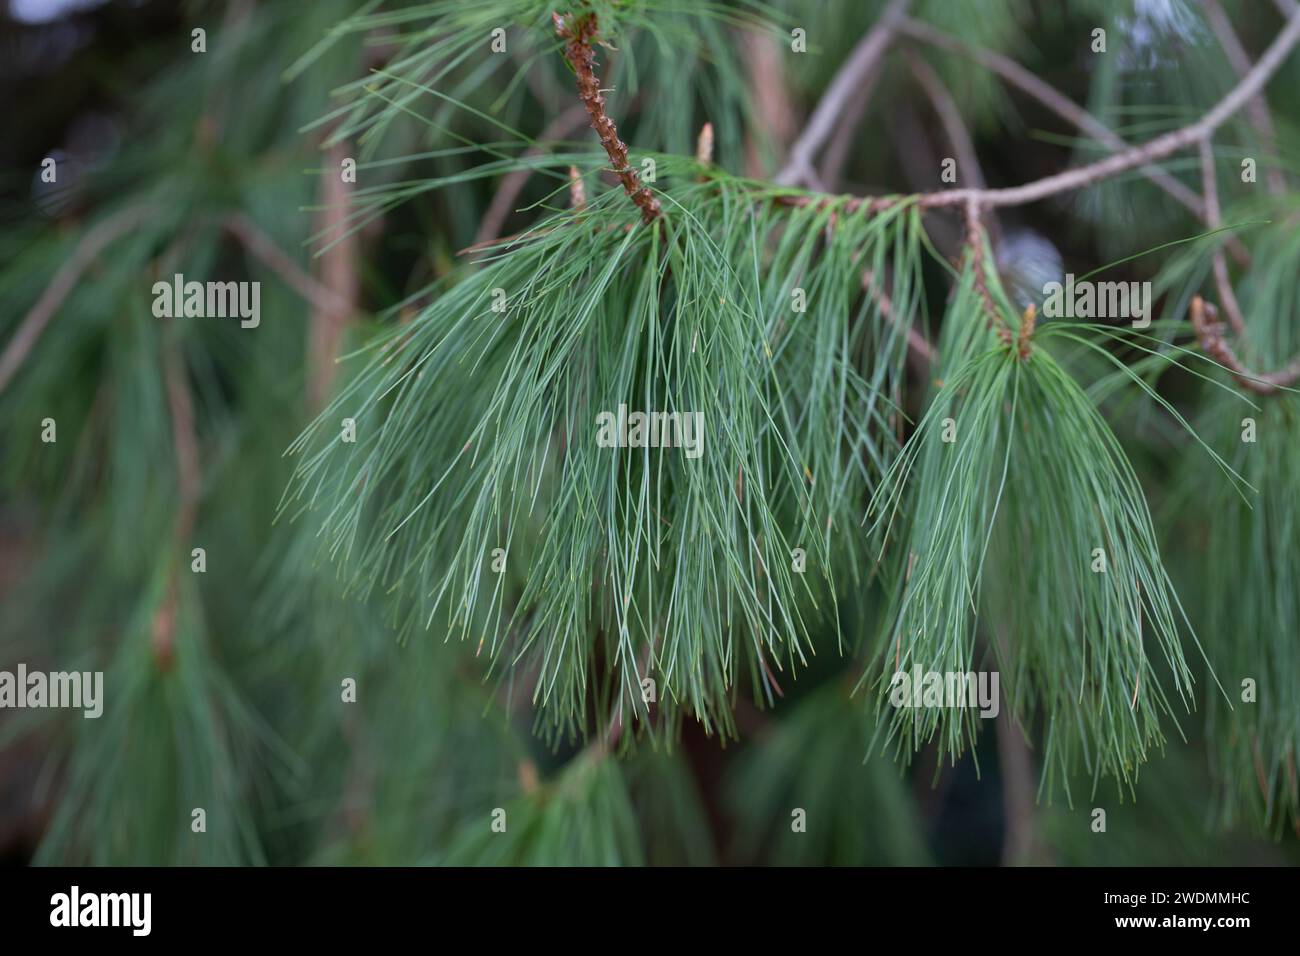 Long-coniferous pine. Pinus leiophylla Schiede ex Schltdl. Commonly known as the thin-leaved pine, it is a species of coniferous trees in the Pine fam Stock Photo